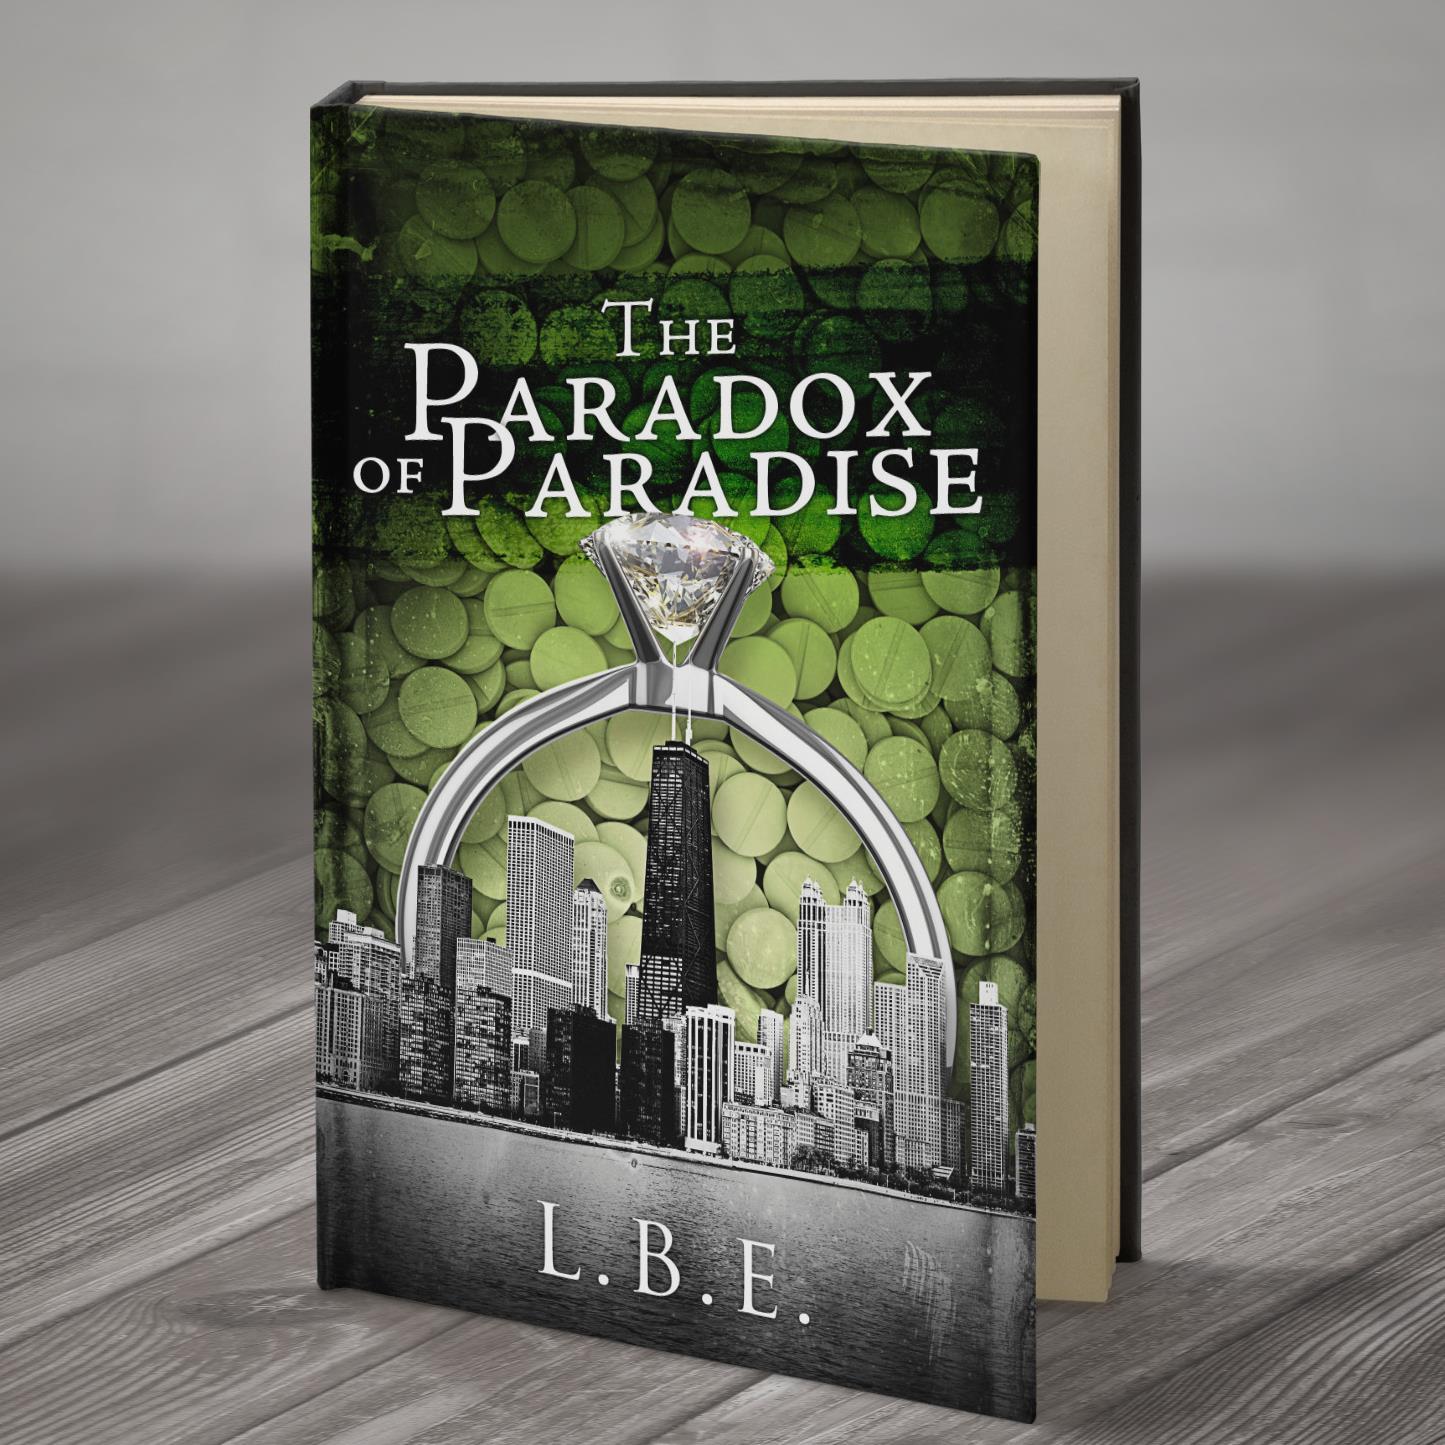 Author of The Paradox of Paradise https://t.co/MdaEYMJvYo http://t.co/qu7bBQvfIx